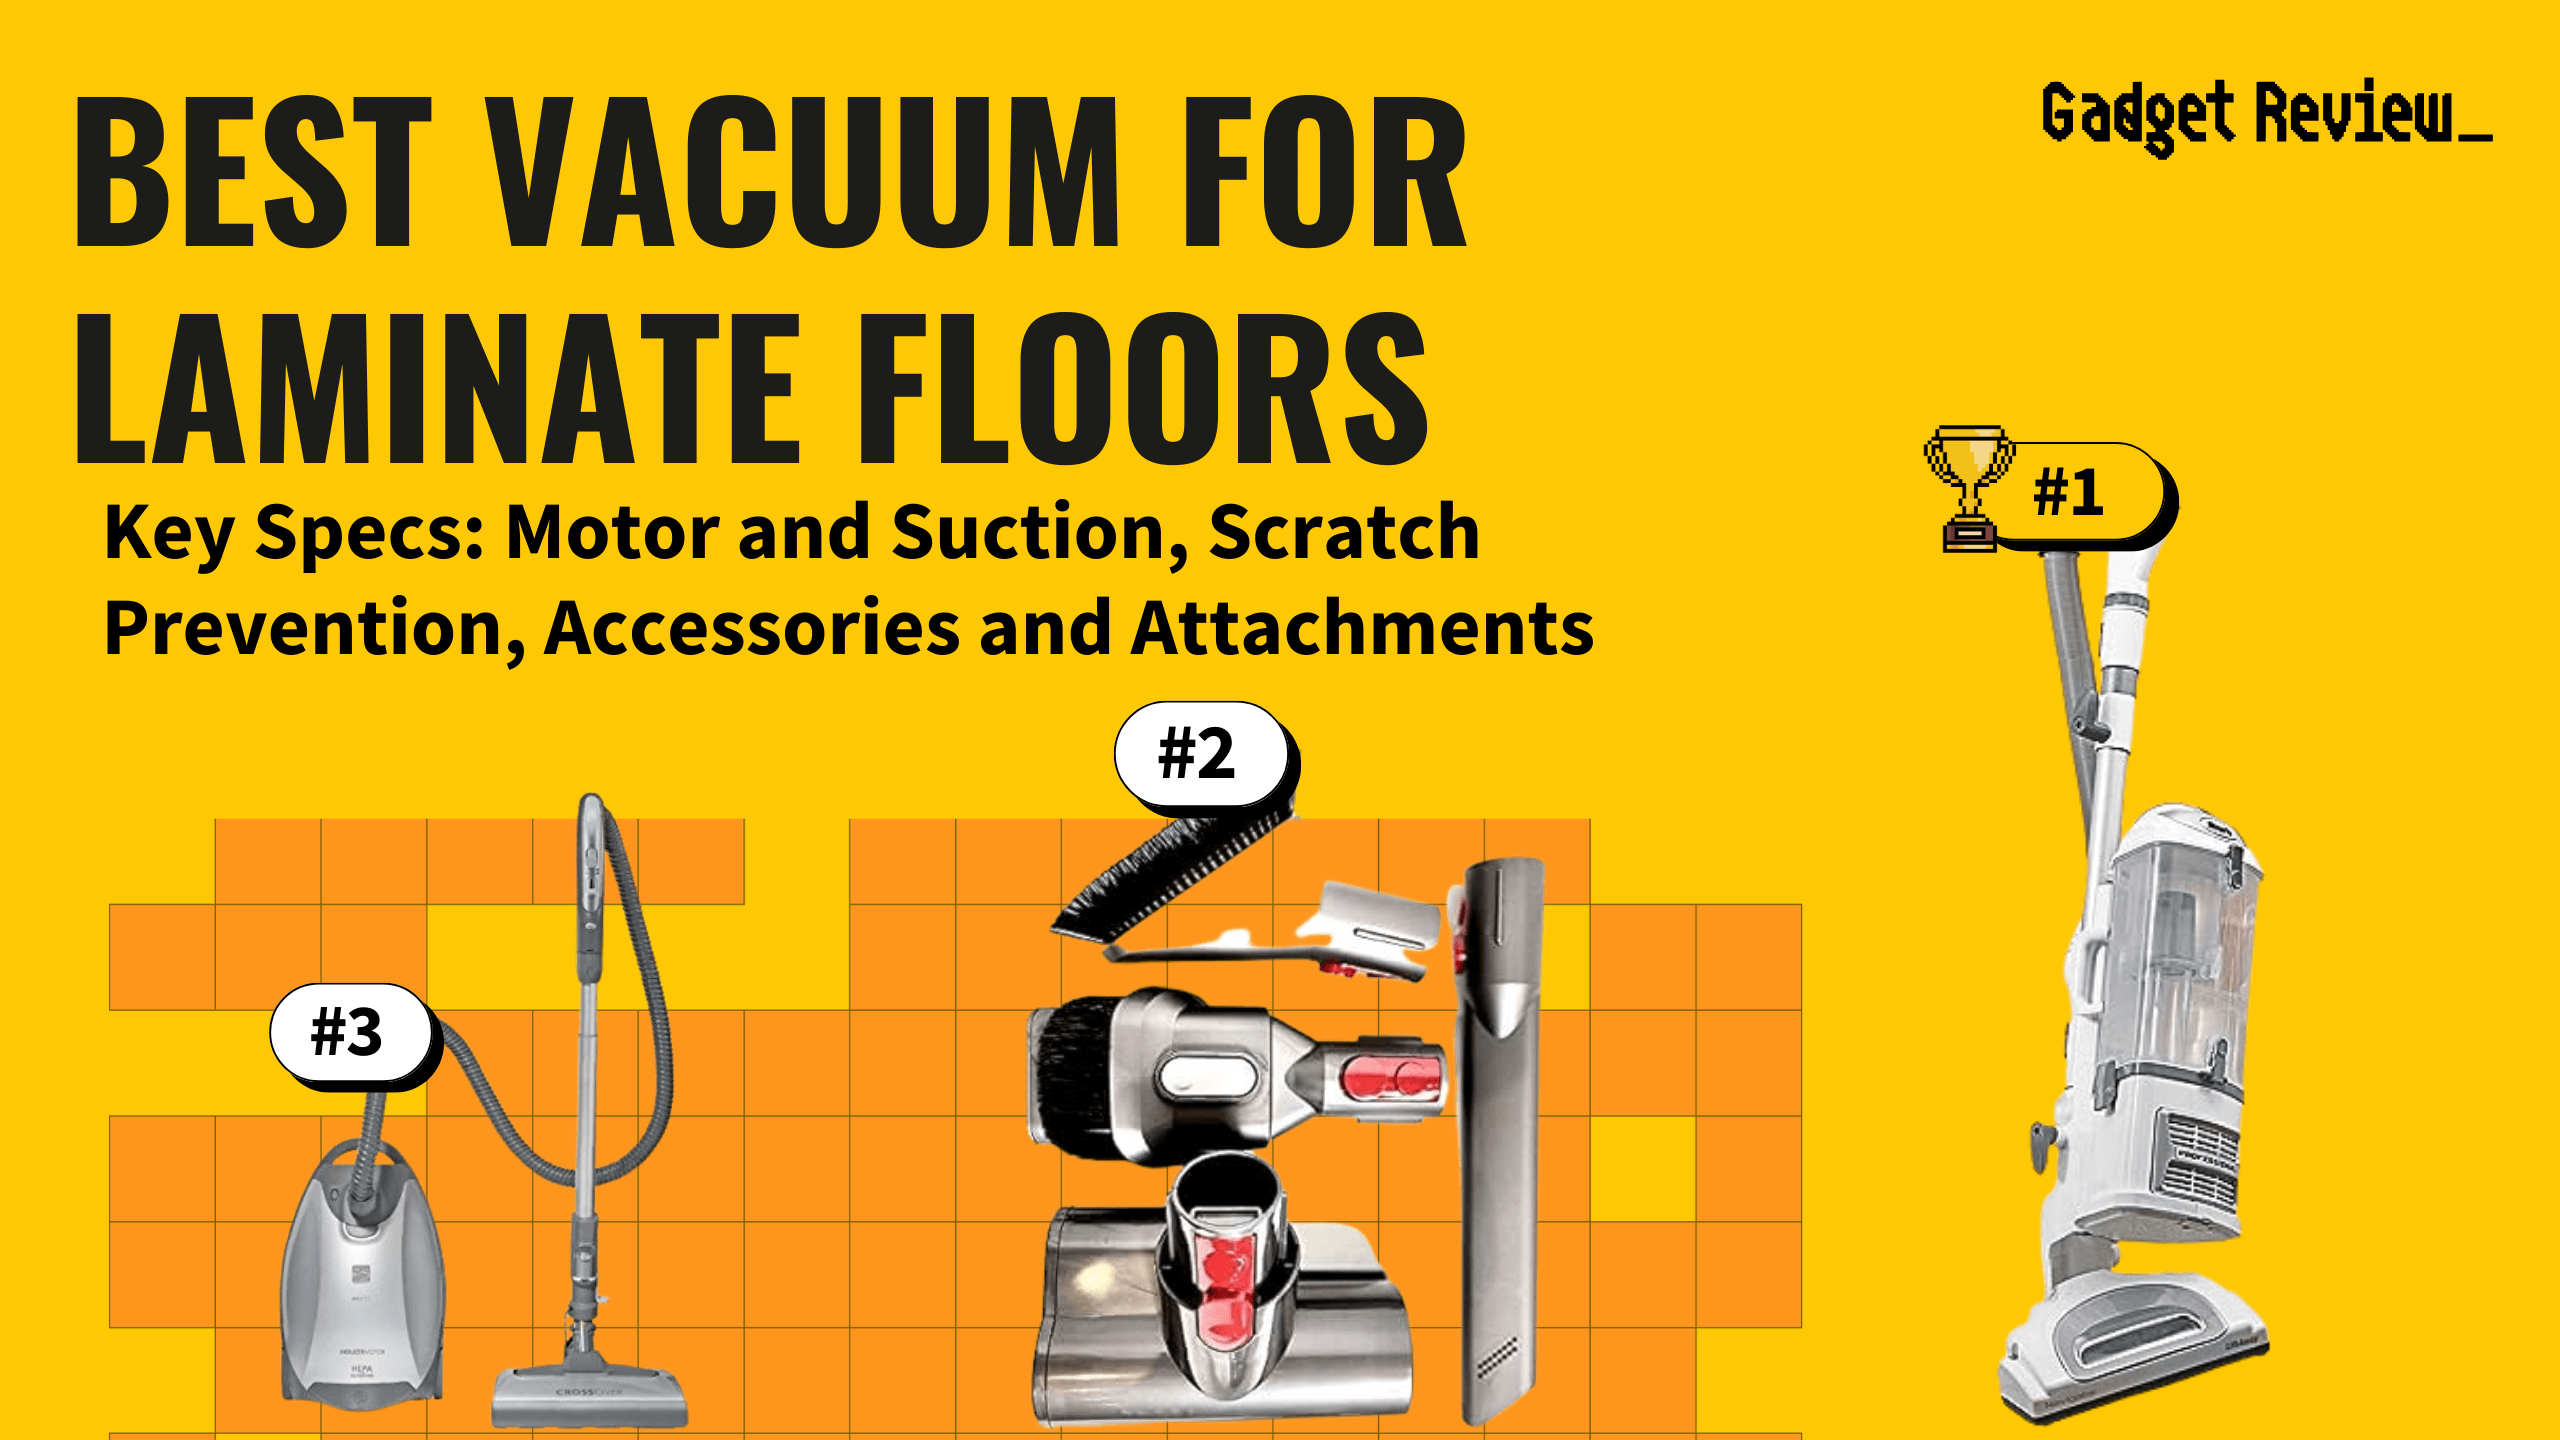 best vacuums laminate floors featured image that shows the top three best vacuum cleaner models